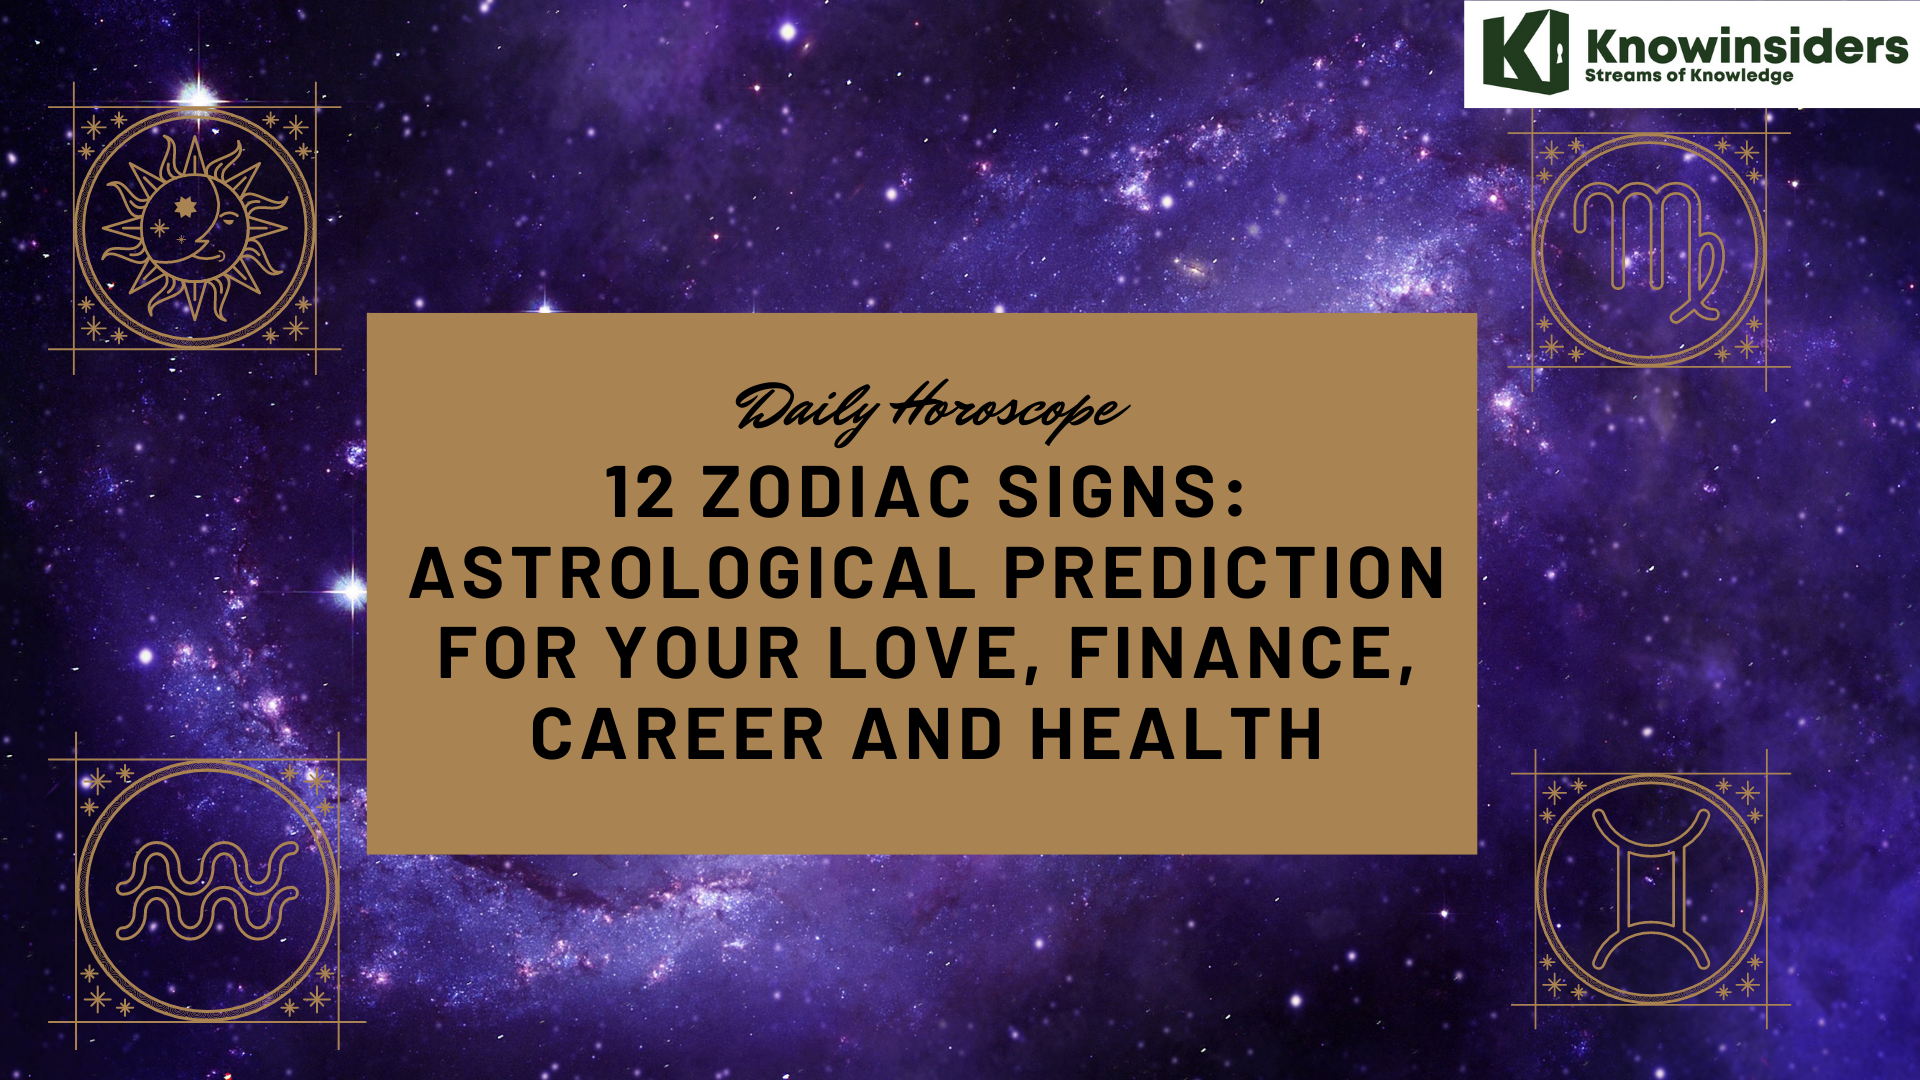 Daily Horoscope (May 30, 2022) of 12 Zodiac Signs: Astrological Prediction For Your Love, Finance, Career and Health